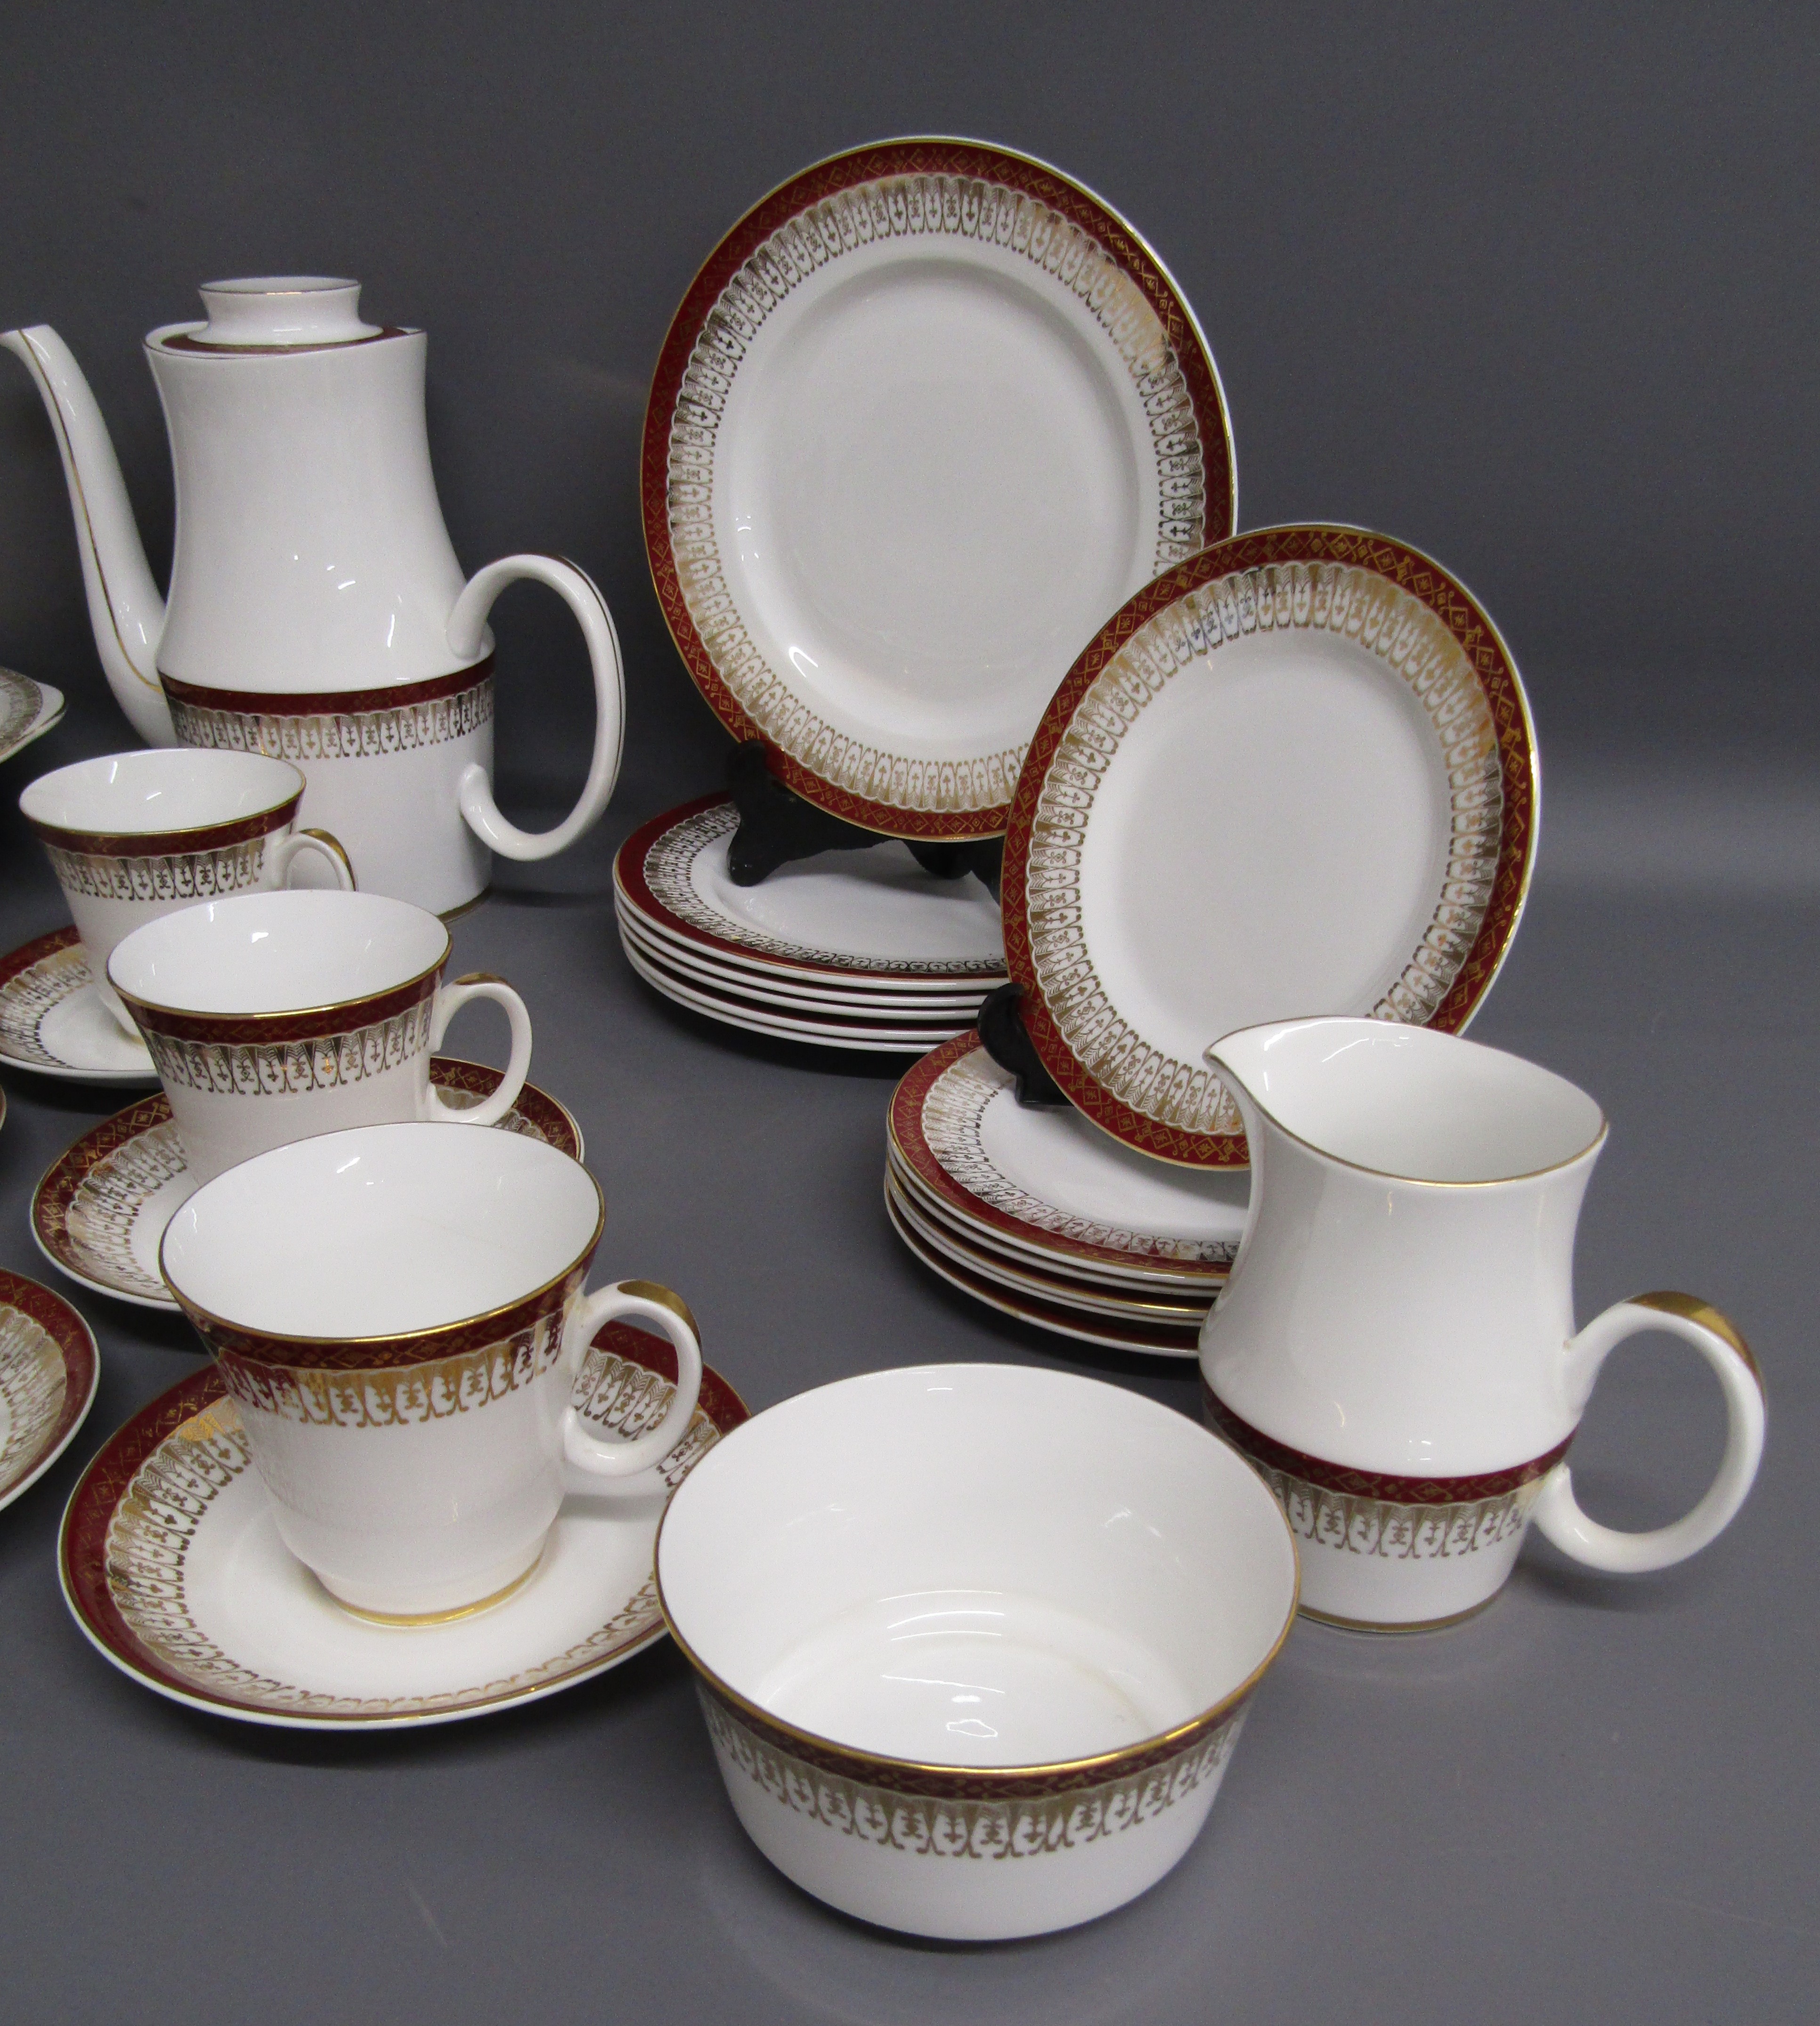 Royal Grafton 'Majestic' tea set with side plates and 20.5cm plates, tureens and gravy boat - Image 4 of 5